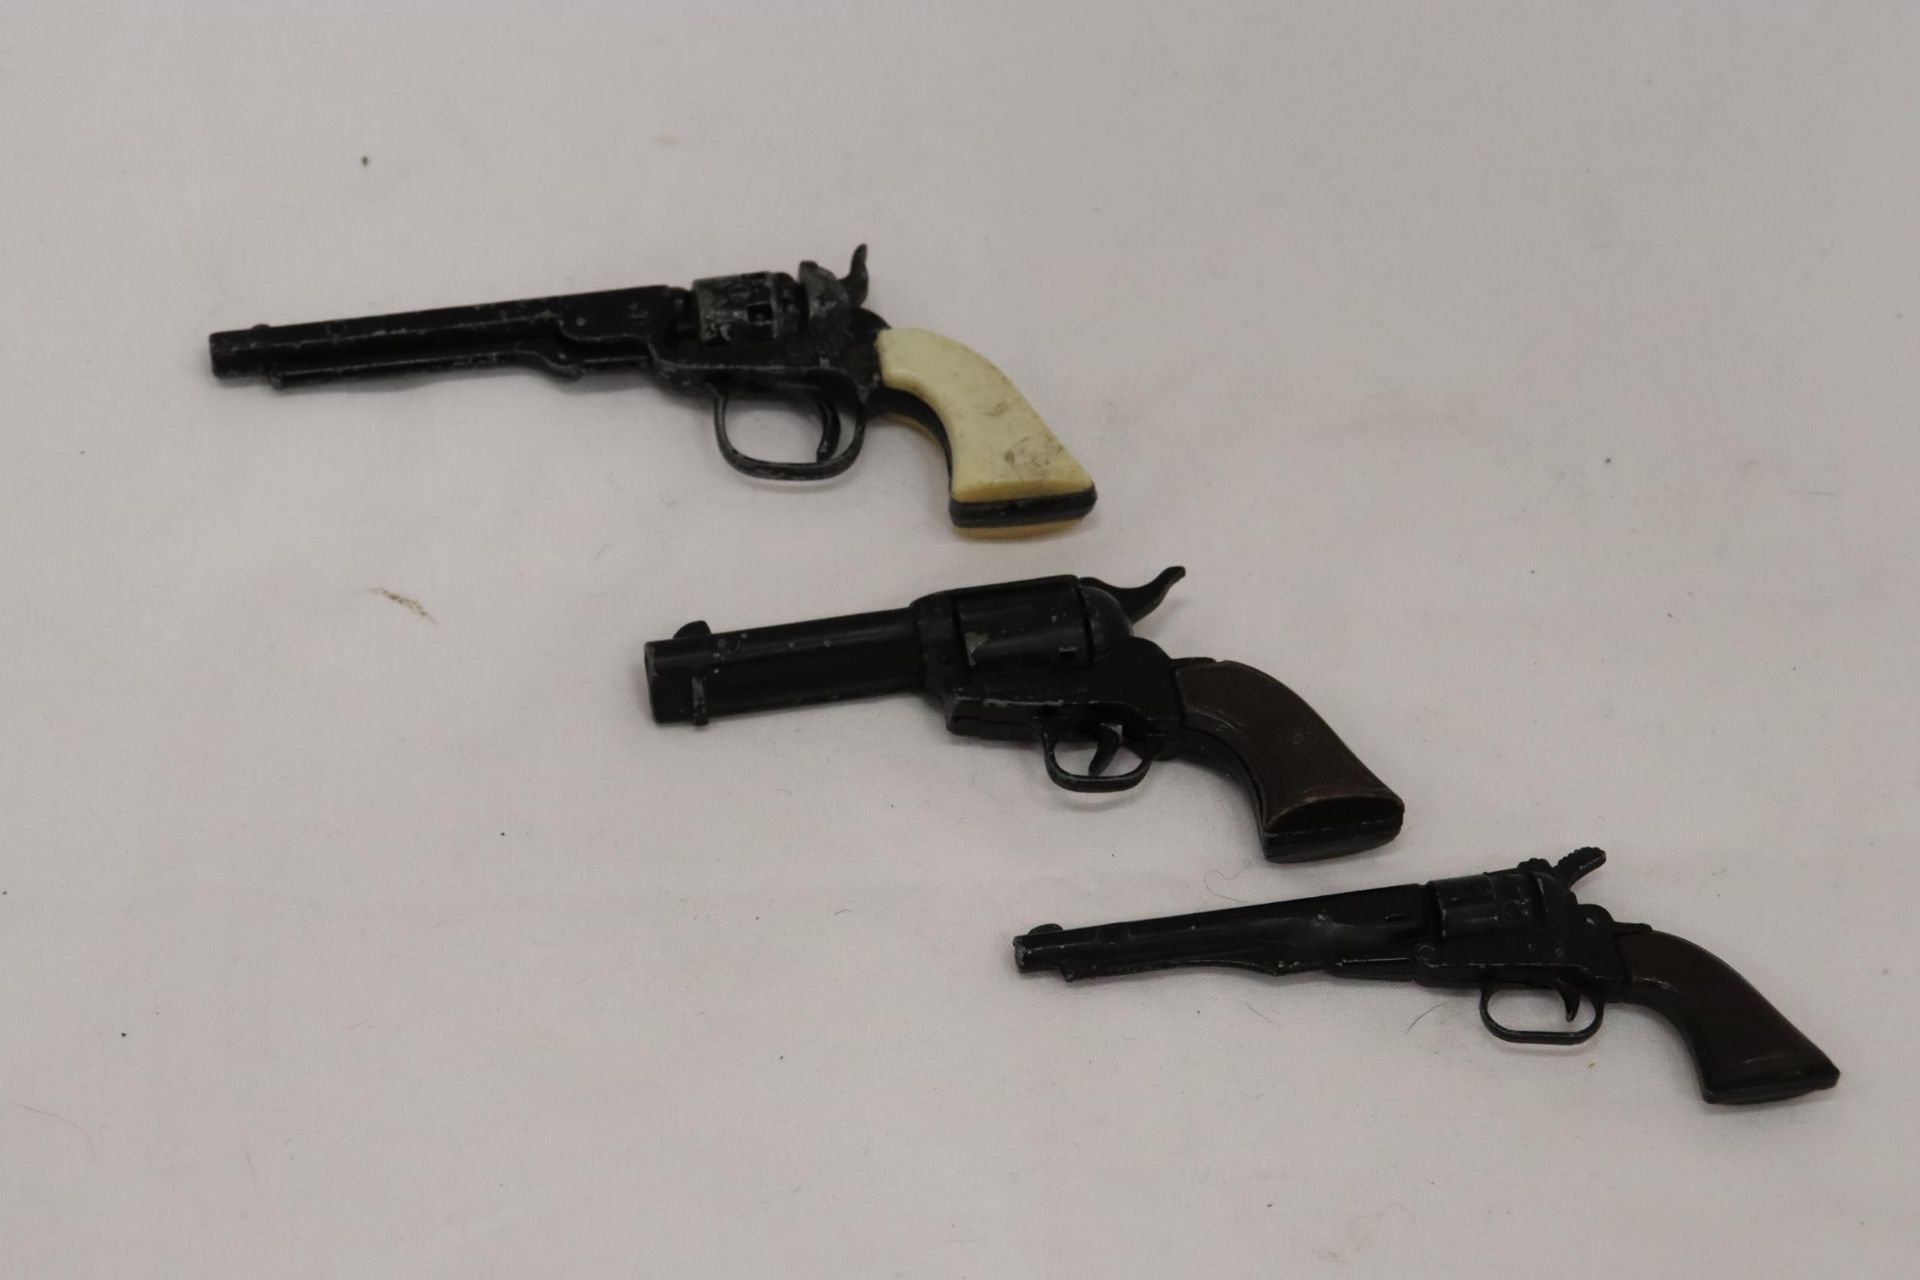 THREE SMALL VINTAGE COCKING AND FIRING GUNS, 'OLD TIMER', 'CADET' AND 'FRONTIER', LENGTH 11CM - Image 4 of 7